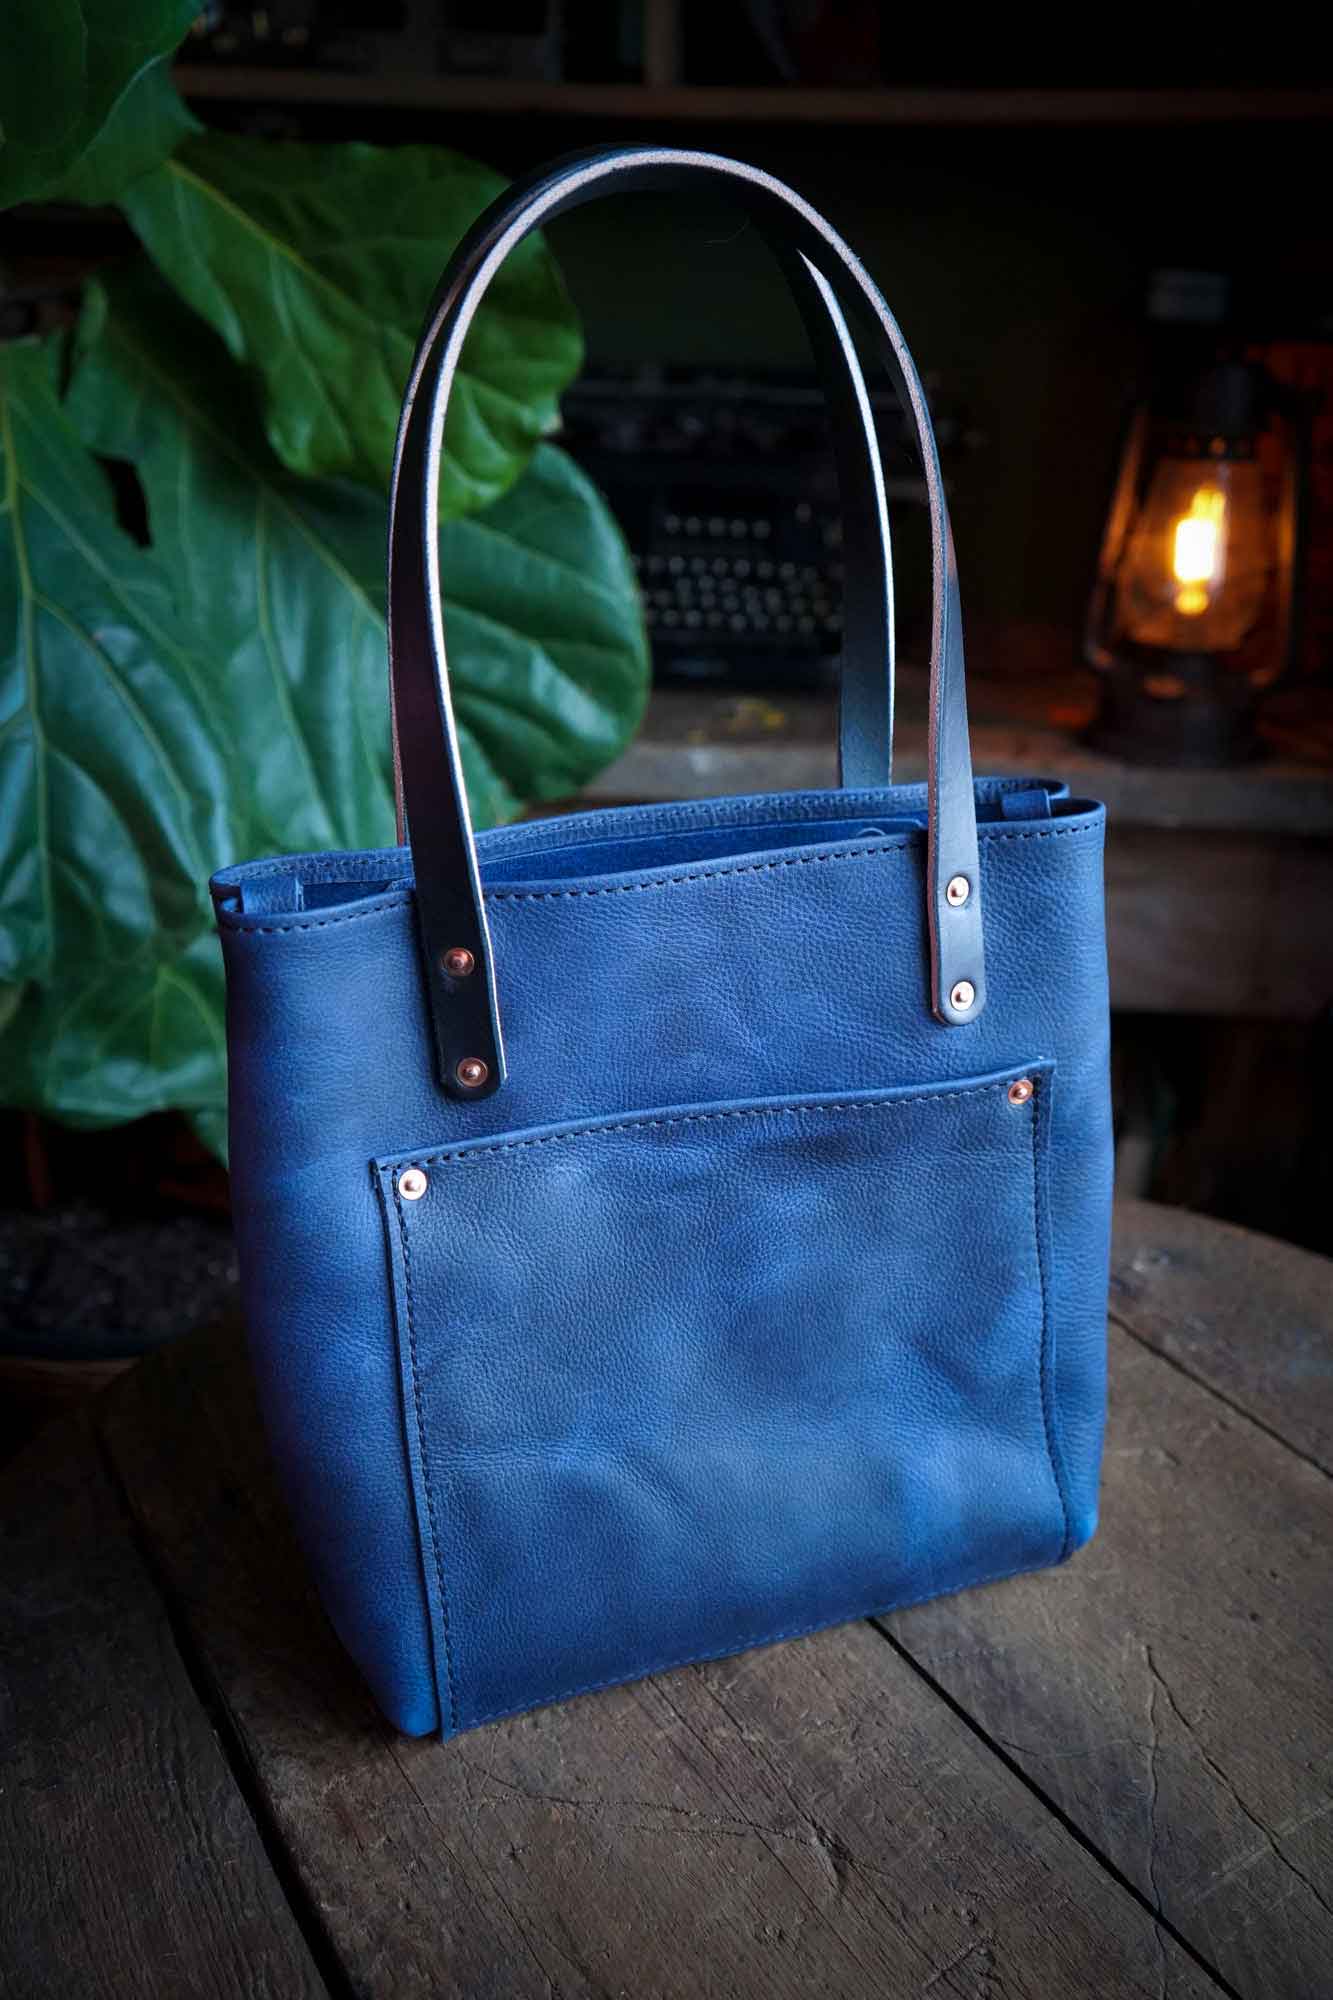 Mini Leather Tote Bag - With Front Pocket